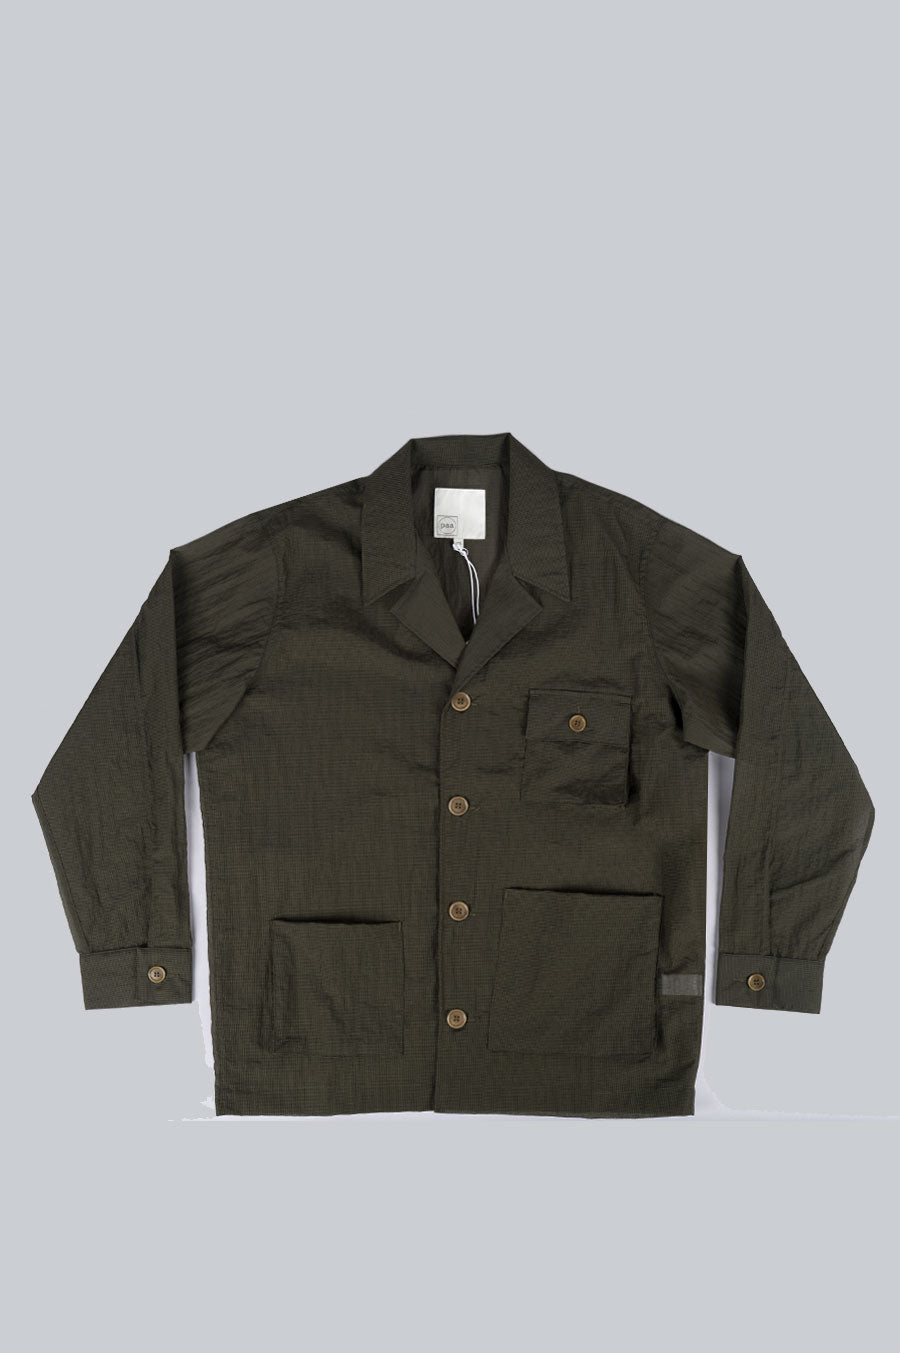 HOUSE OF PAA SITE COAT DEEP OLIVE DRAB